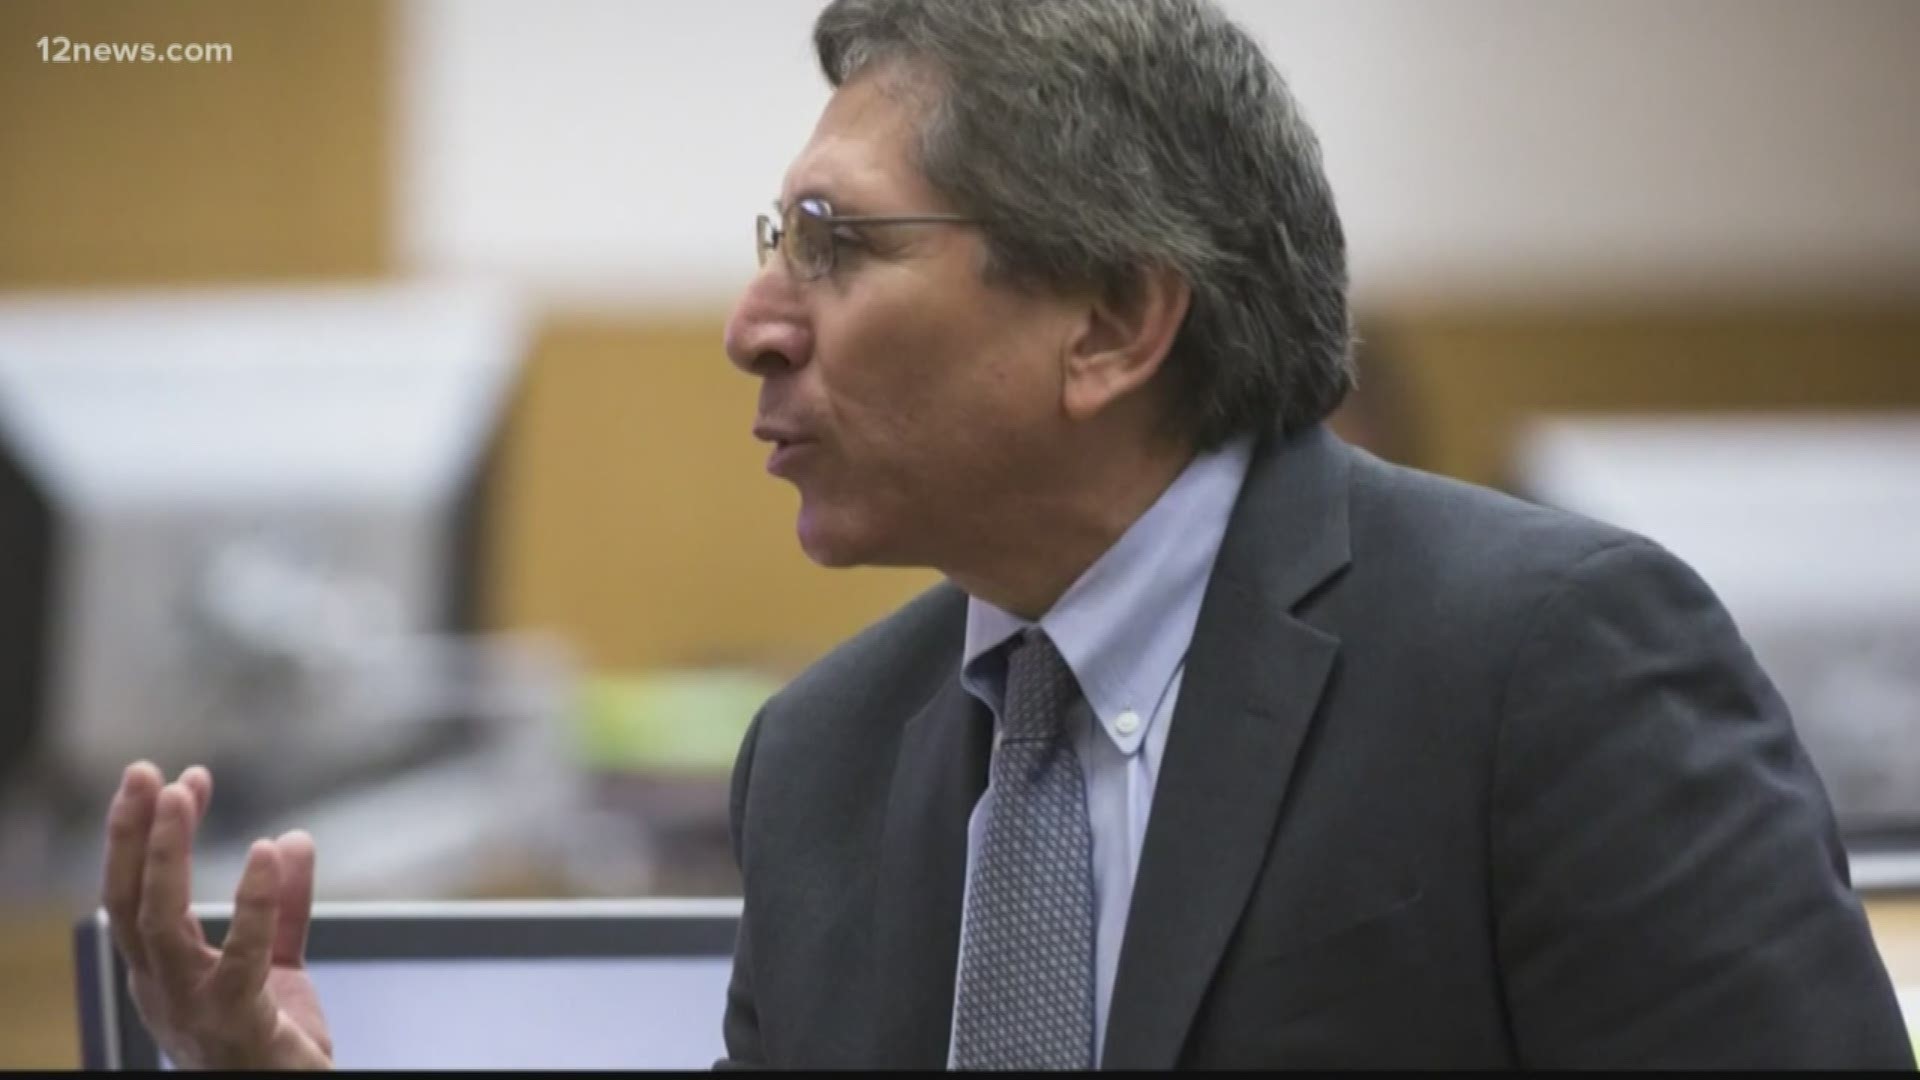 Juan Martinez is a long way from his days as a cable TV celebrity prosecuting Jodi Arias. His 30-year career could be coming to close due to alleged misconduct.